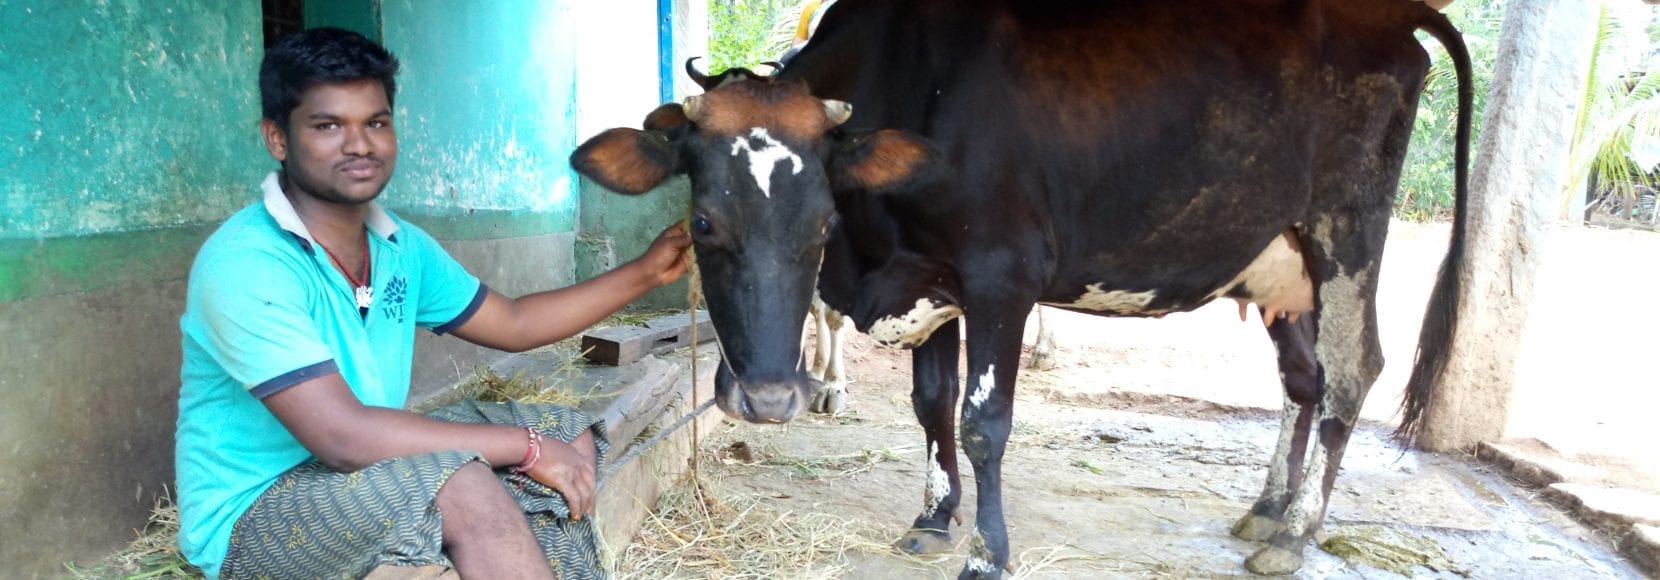 Youth economic opportunity is a benefit seen by countless TechnoServe program participants like Suresha from the Cargill Agri-Fellows program in India with his newly purchased cow